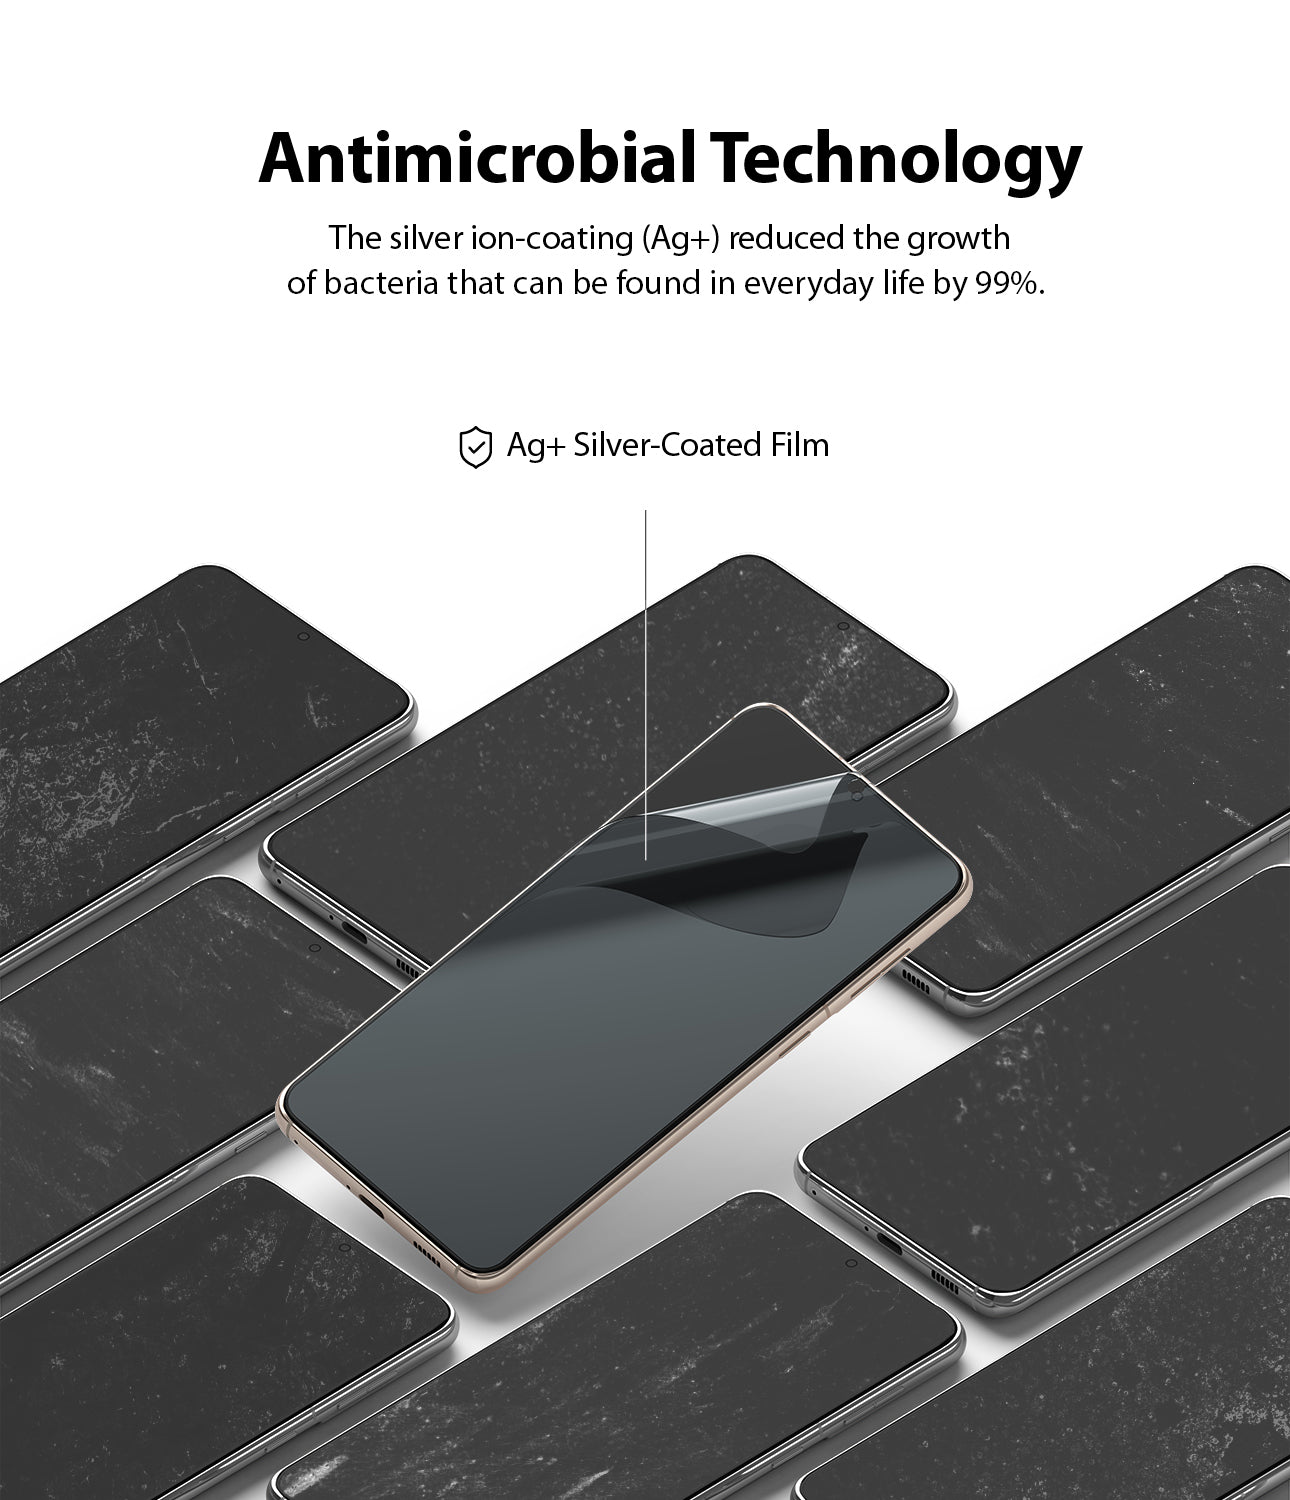 antimicrobial technology with the silver ion coating